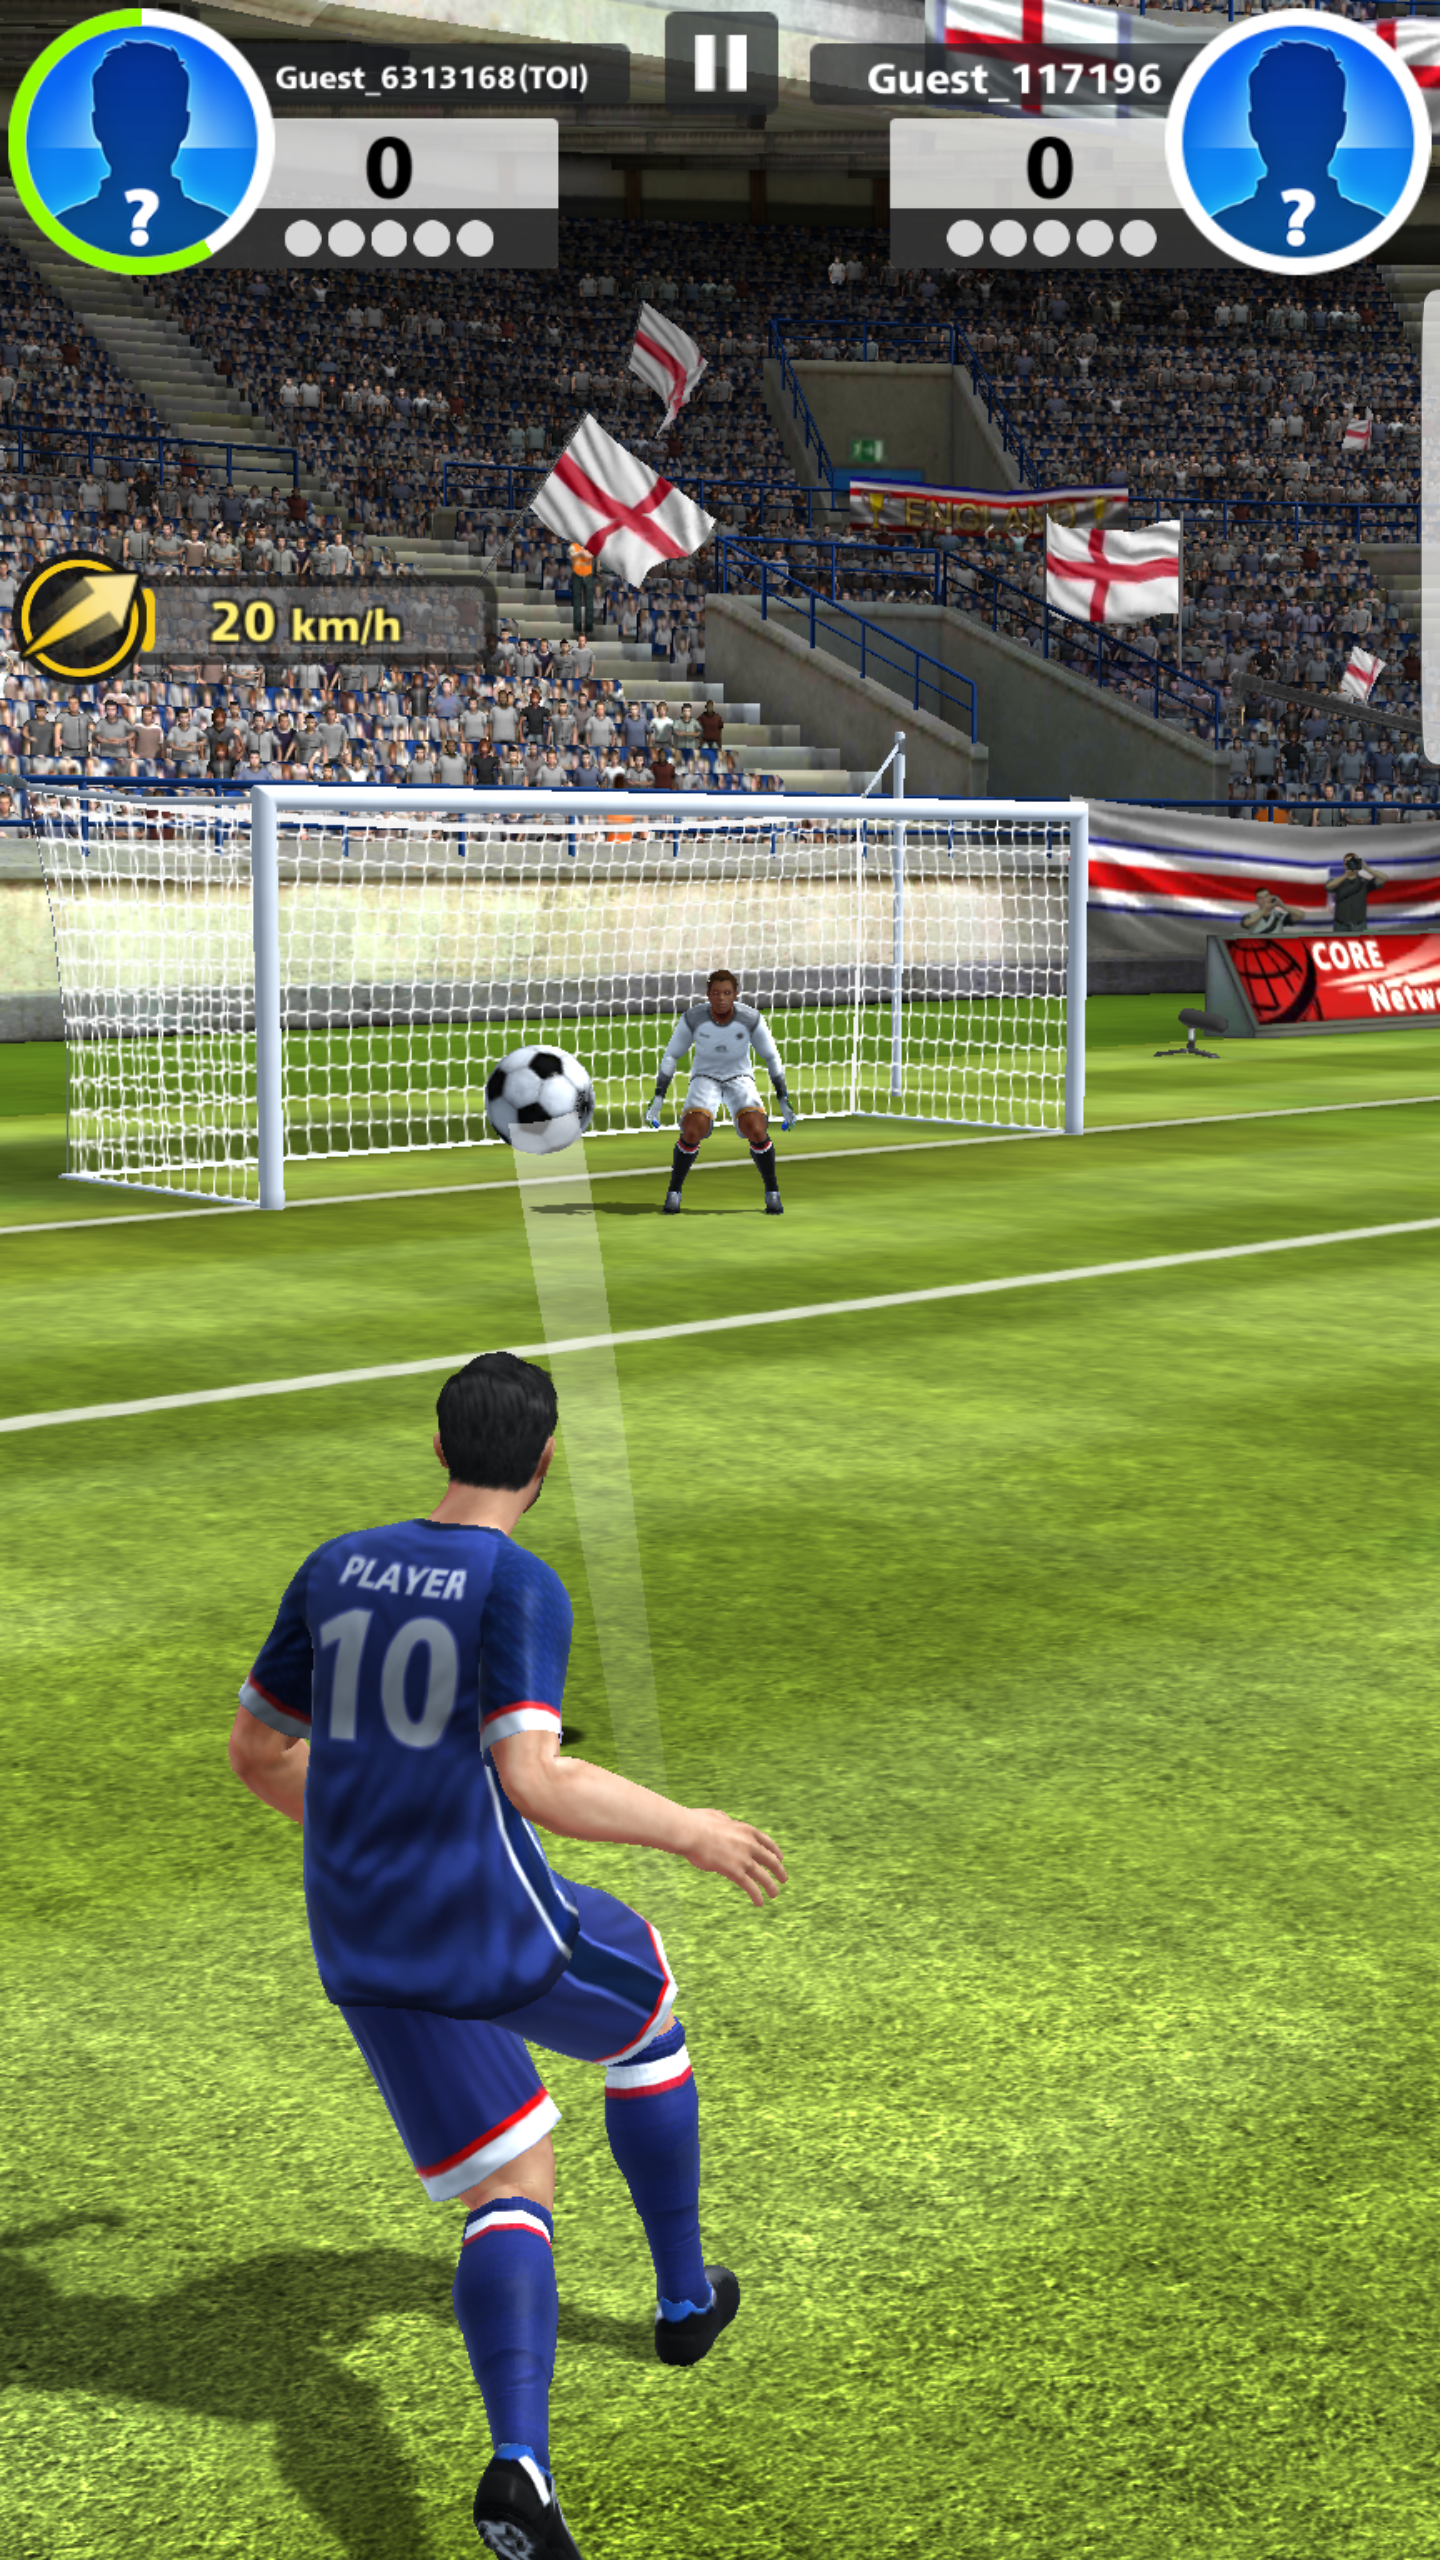 Football Strike - Perfect Kick for android instal